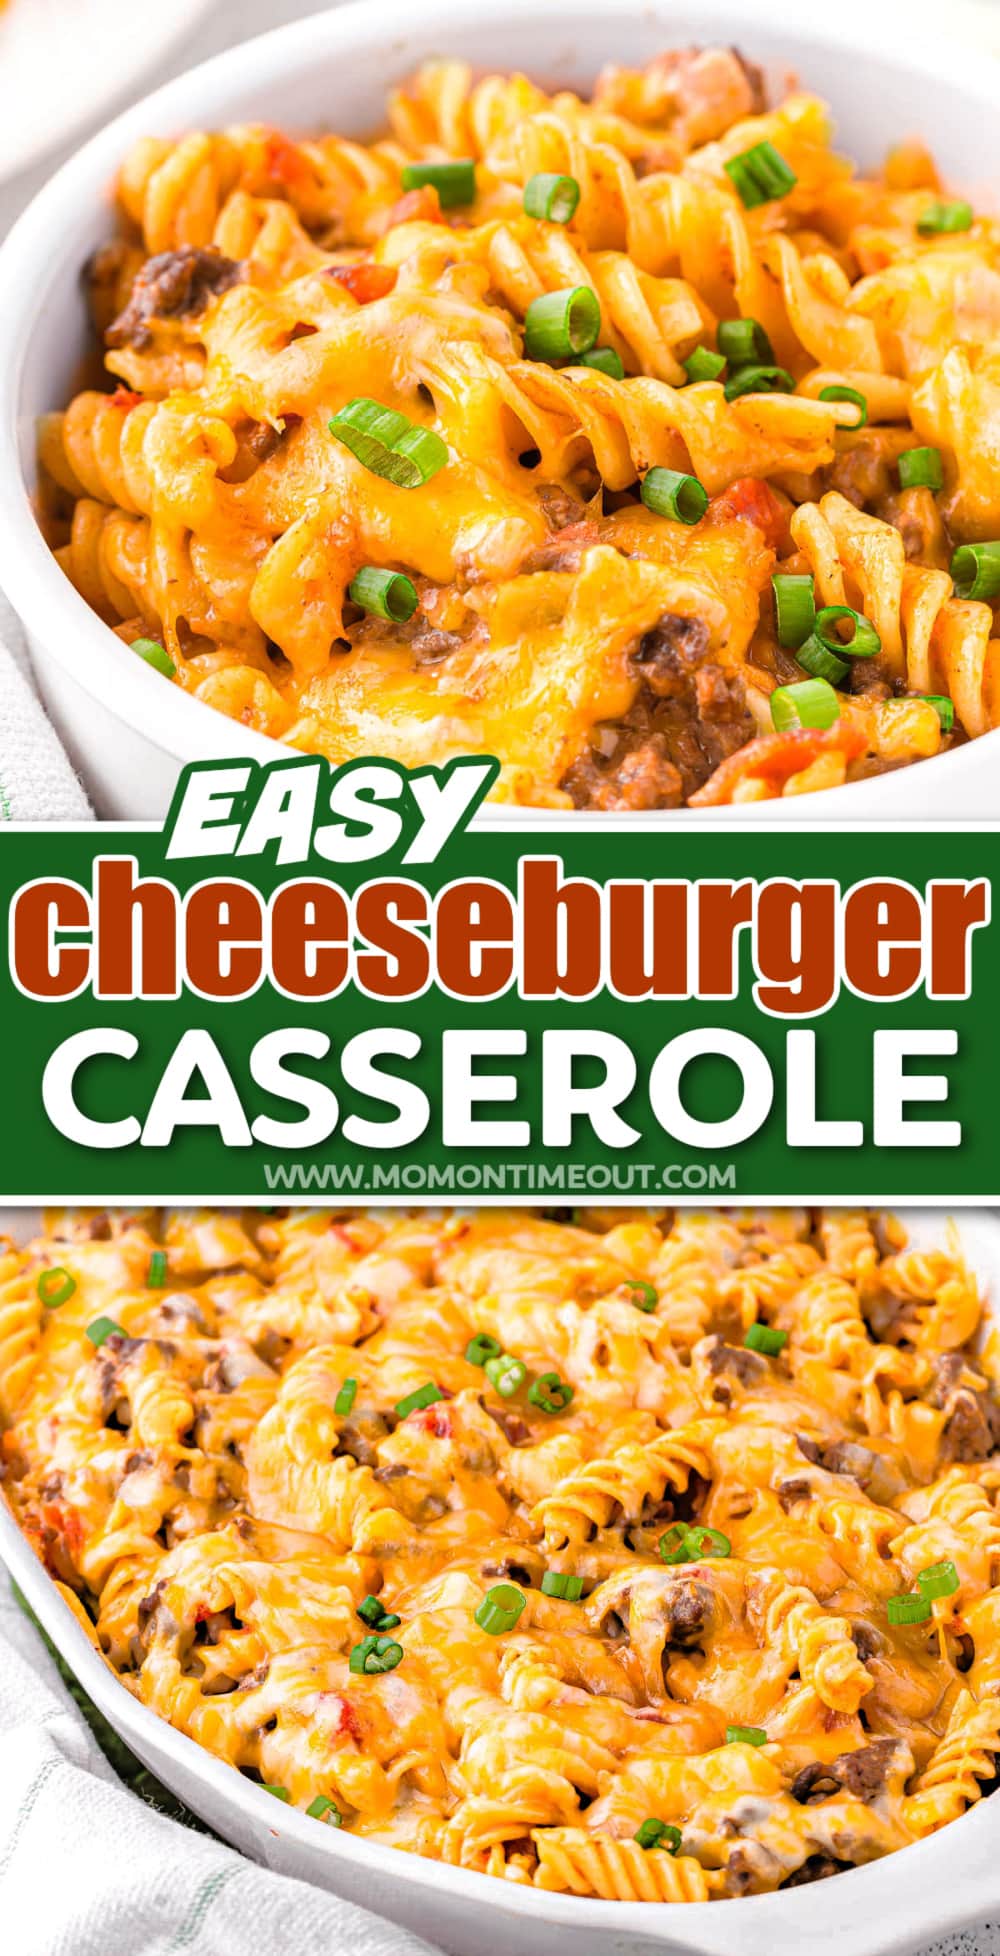 Easy Cheeseburger Casserole - Mom On Timeout